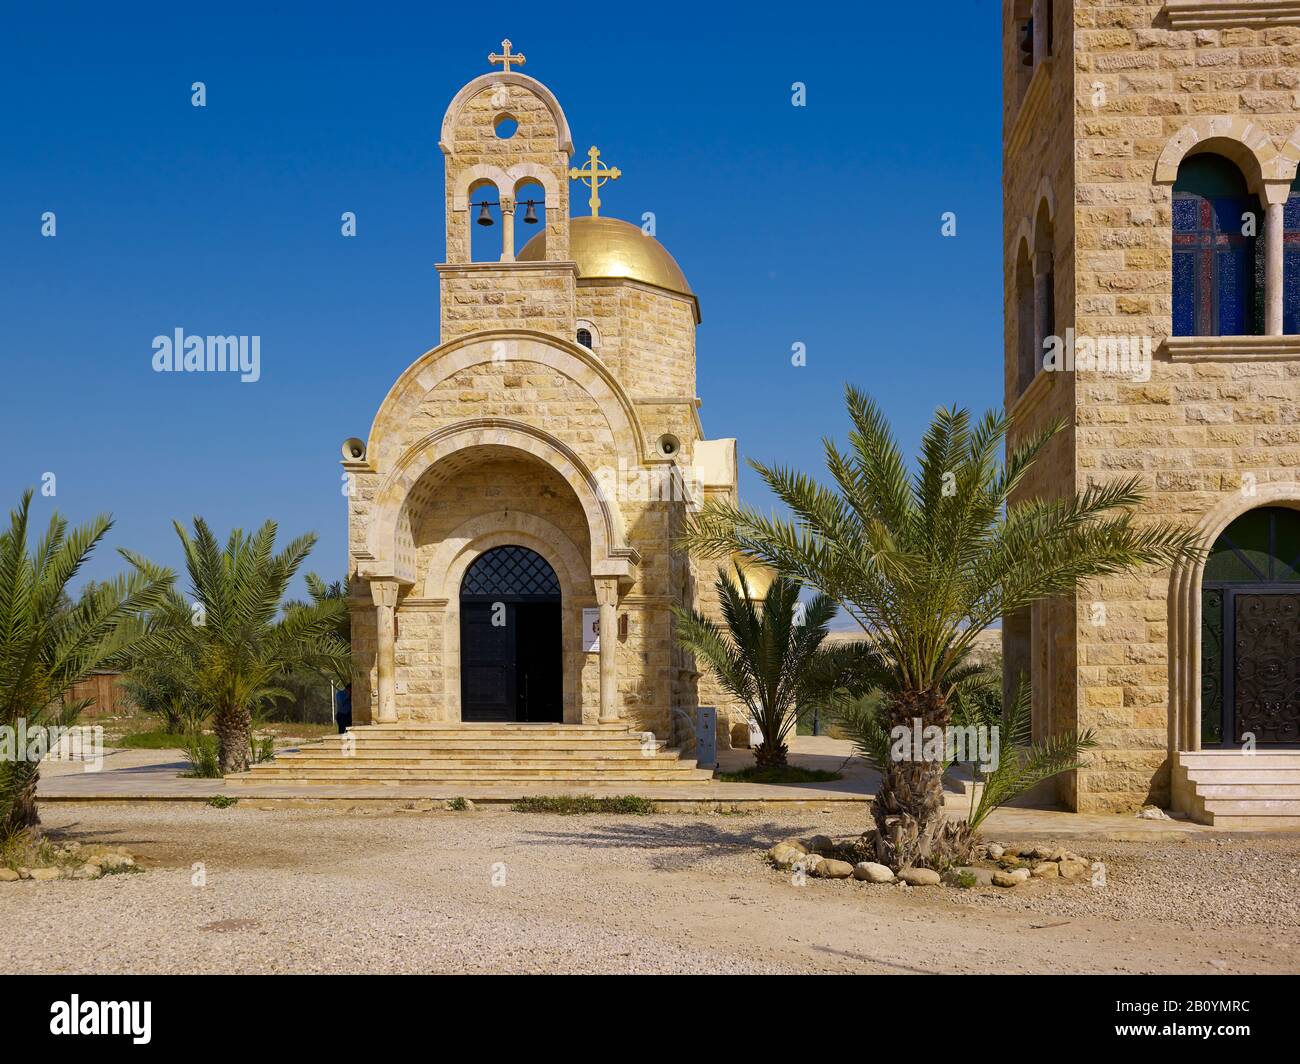 Baptism site of Jesus with new Orthodox Church and bell tower, Bethany, Balqa Province, Jordan, Middle East, Stock Photo